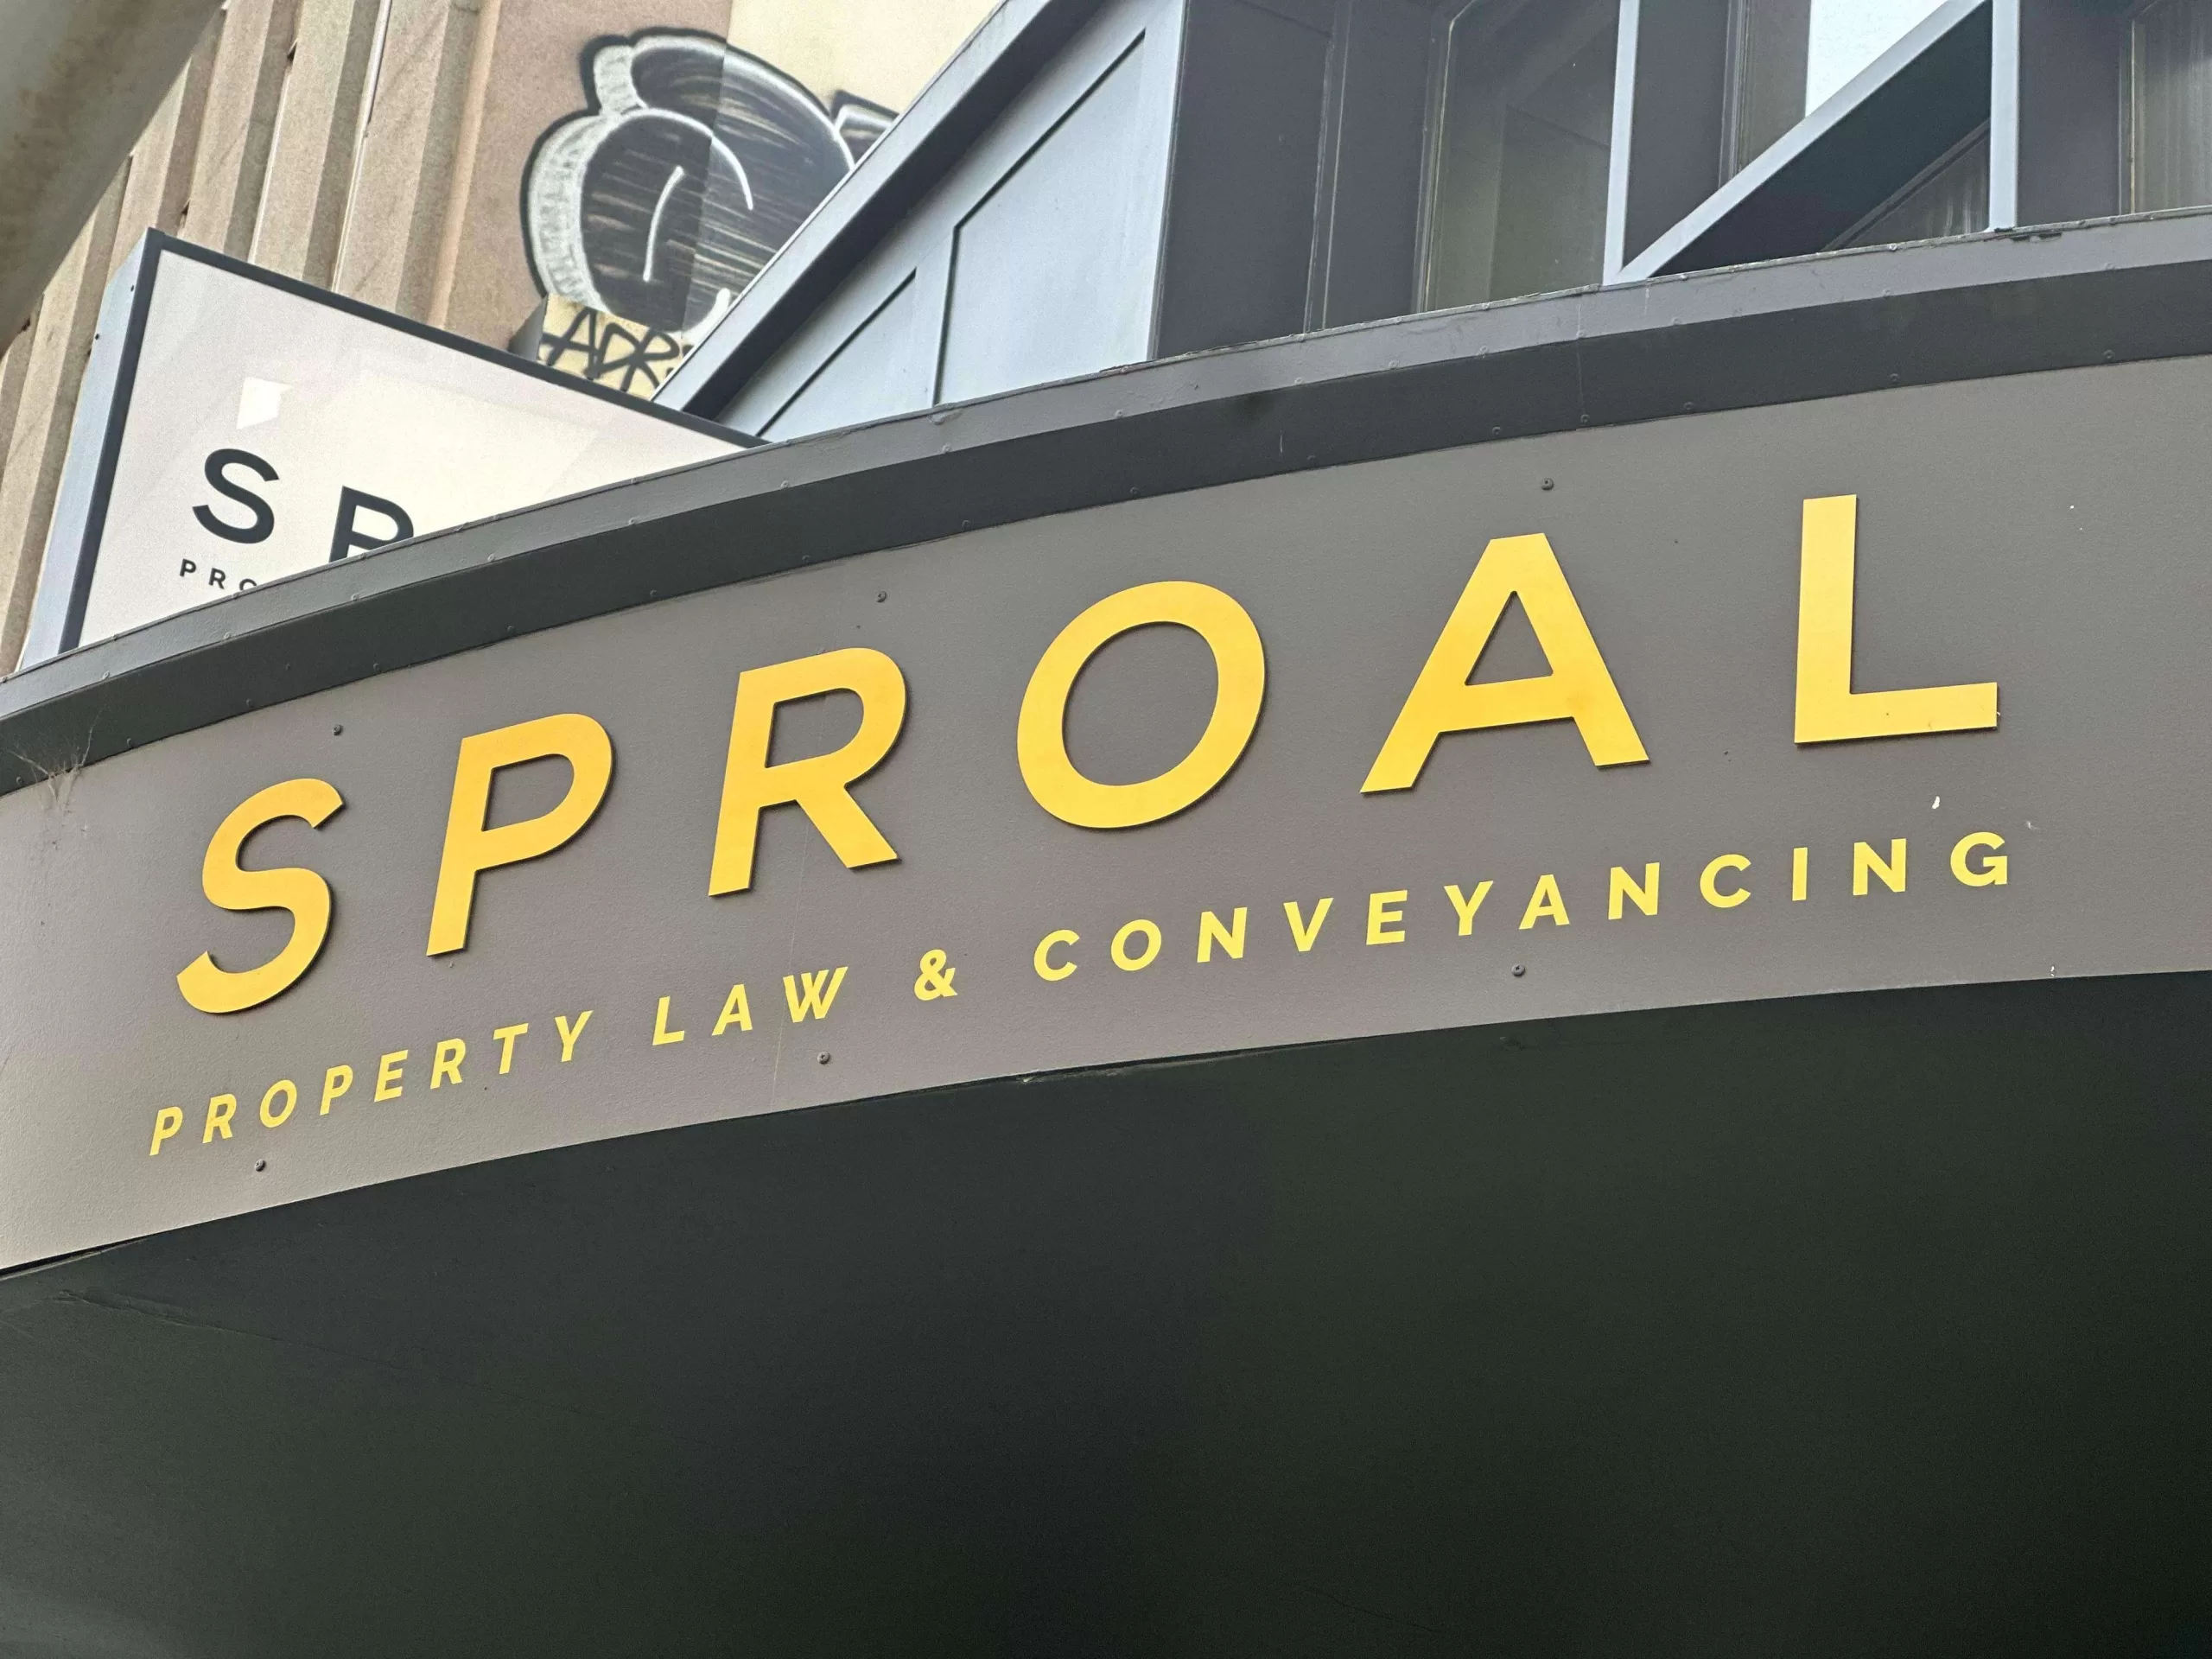 Sproal Property Law & Conveyancing